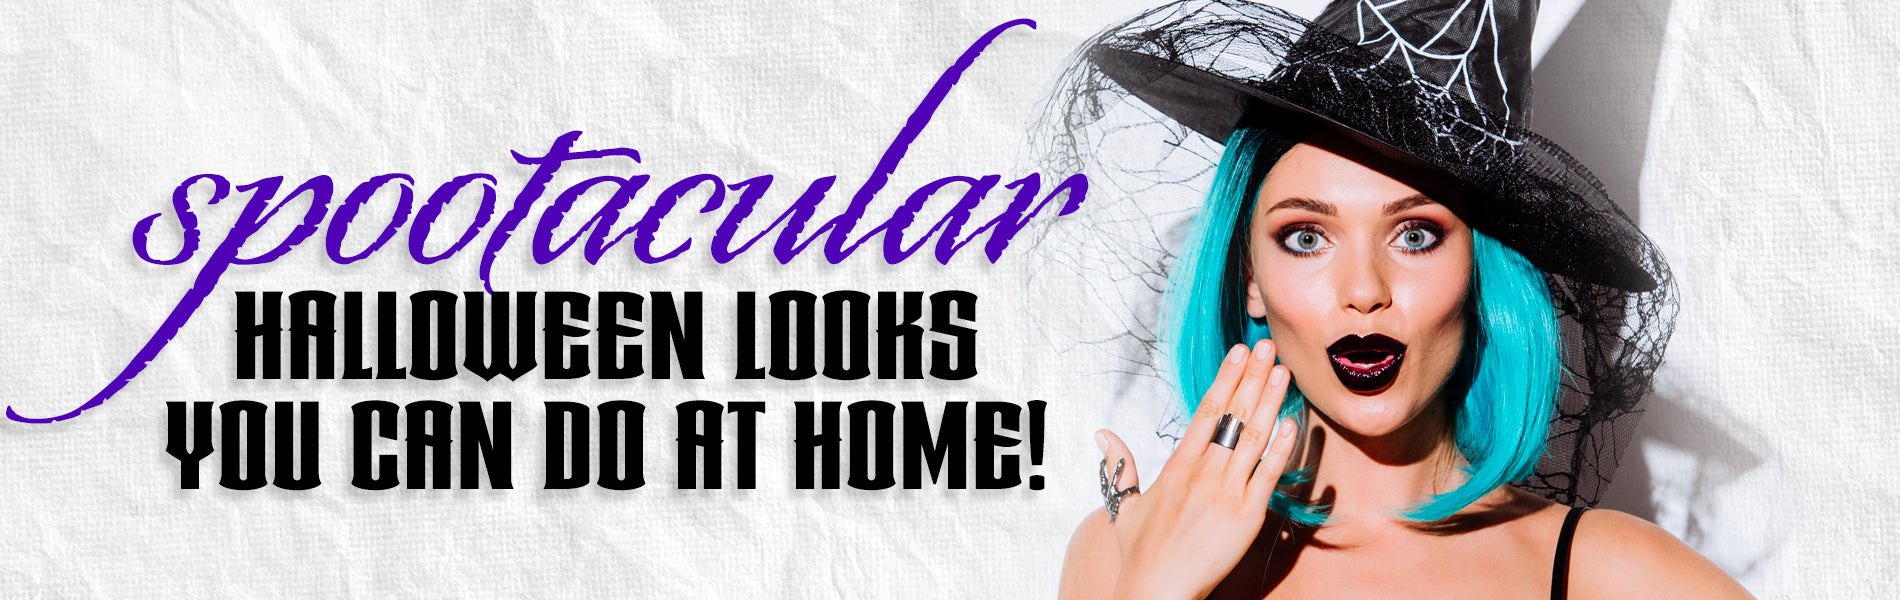 Spooktacular Halloween Looks You Can Do At Home. Woman wearing blue wig and witches hat.